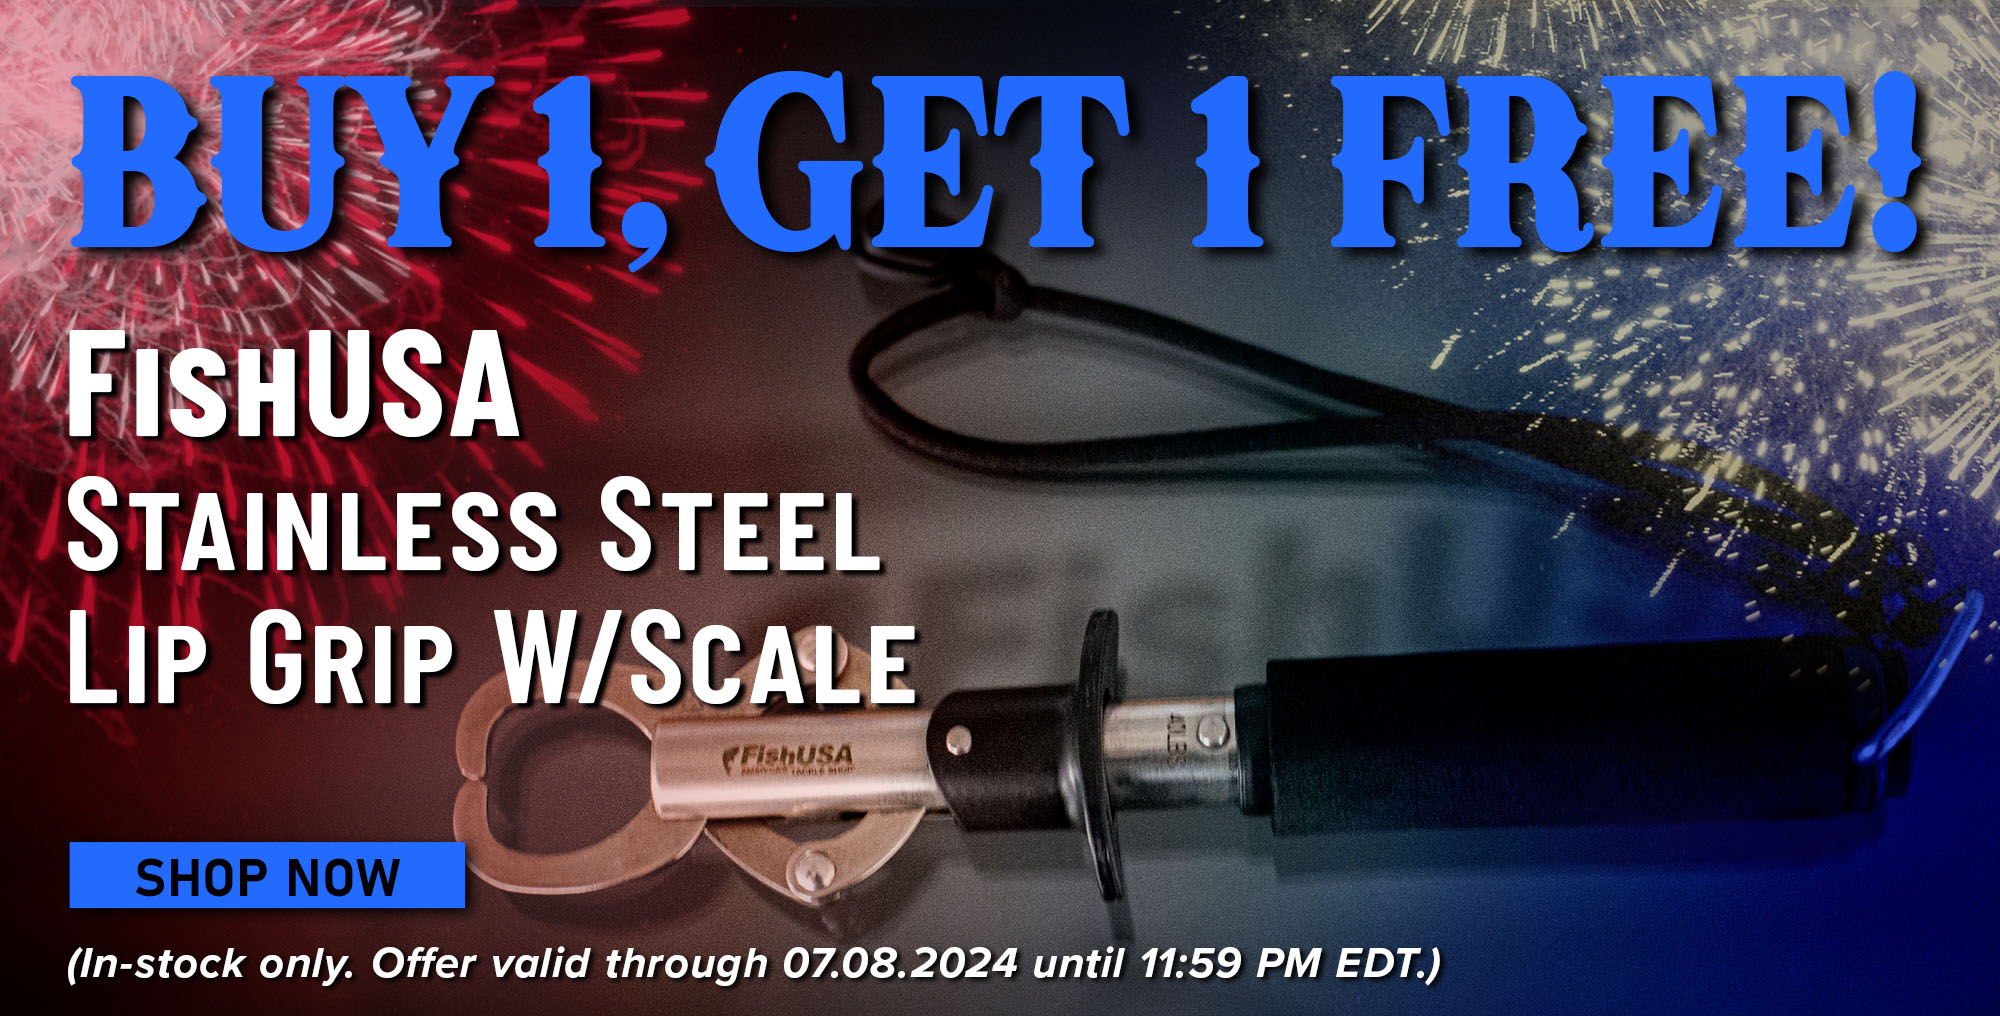 Buy 1, Get 1 Free! FishUSA Stainless Steel Lip Grip with Scale Shop Now (In-stock only. Offer valid through 07.08.2024 until 11:59 PM EDT.)